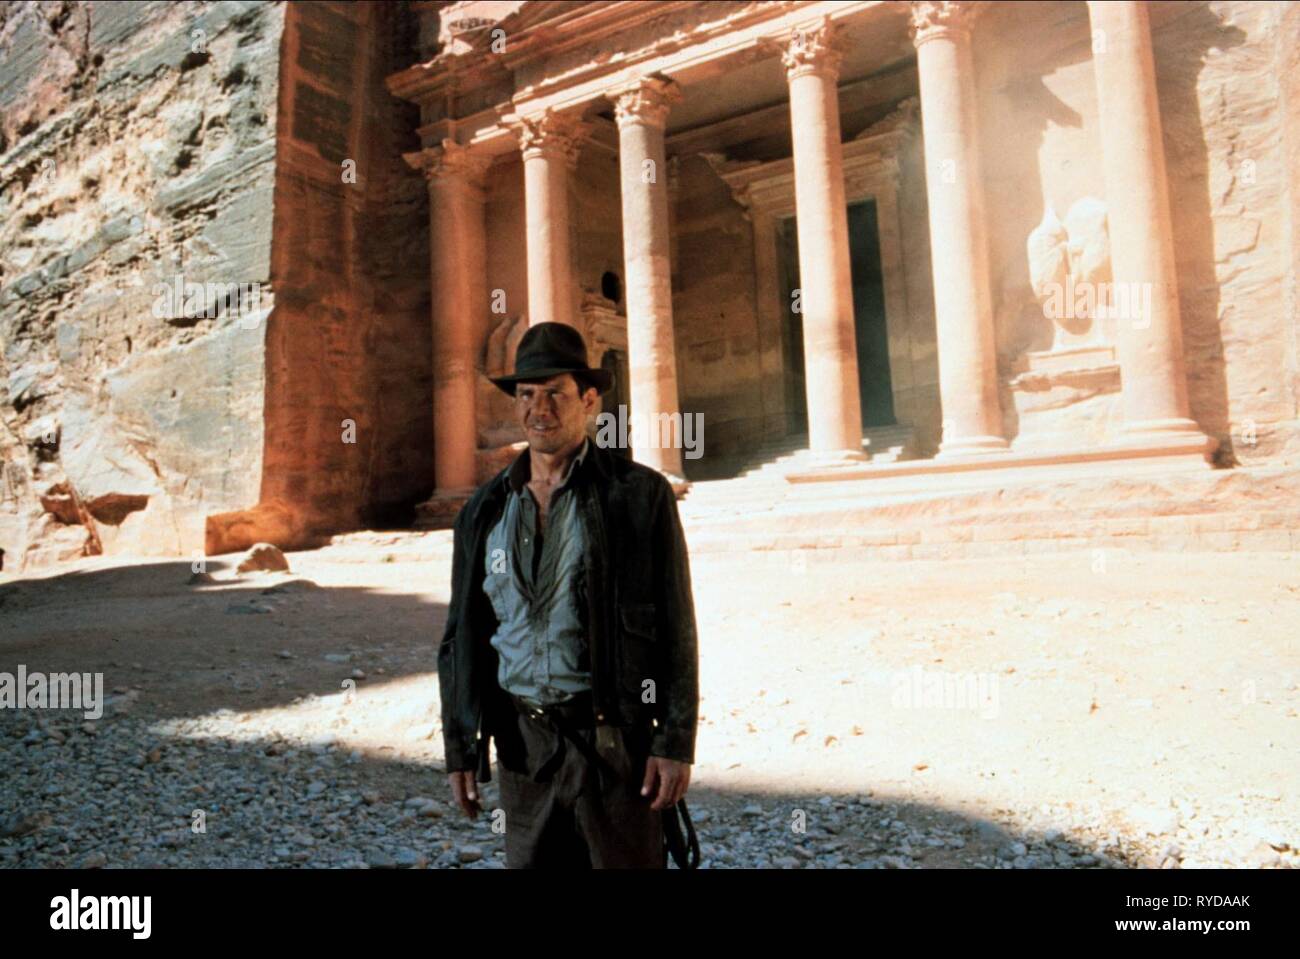 HARRISON FORD, INDIANA JONES AND THE LAST CRUSADE, 1989 Stock Photo